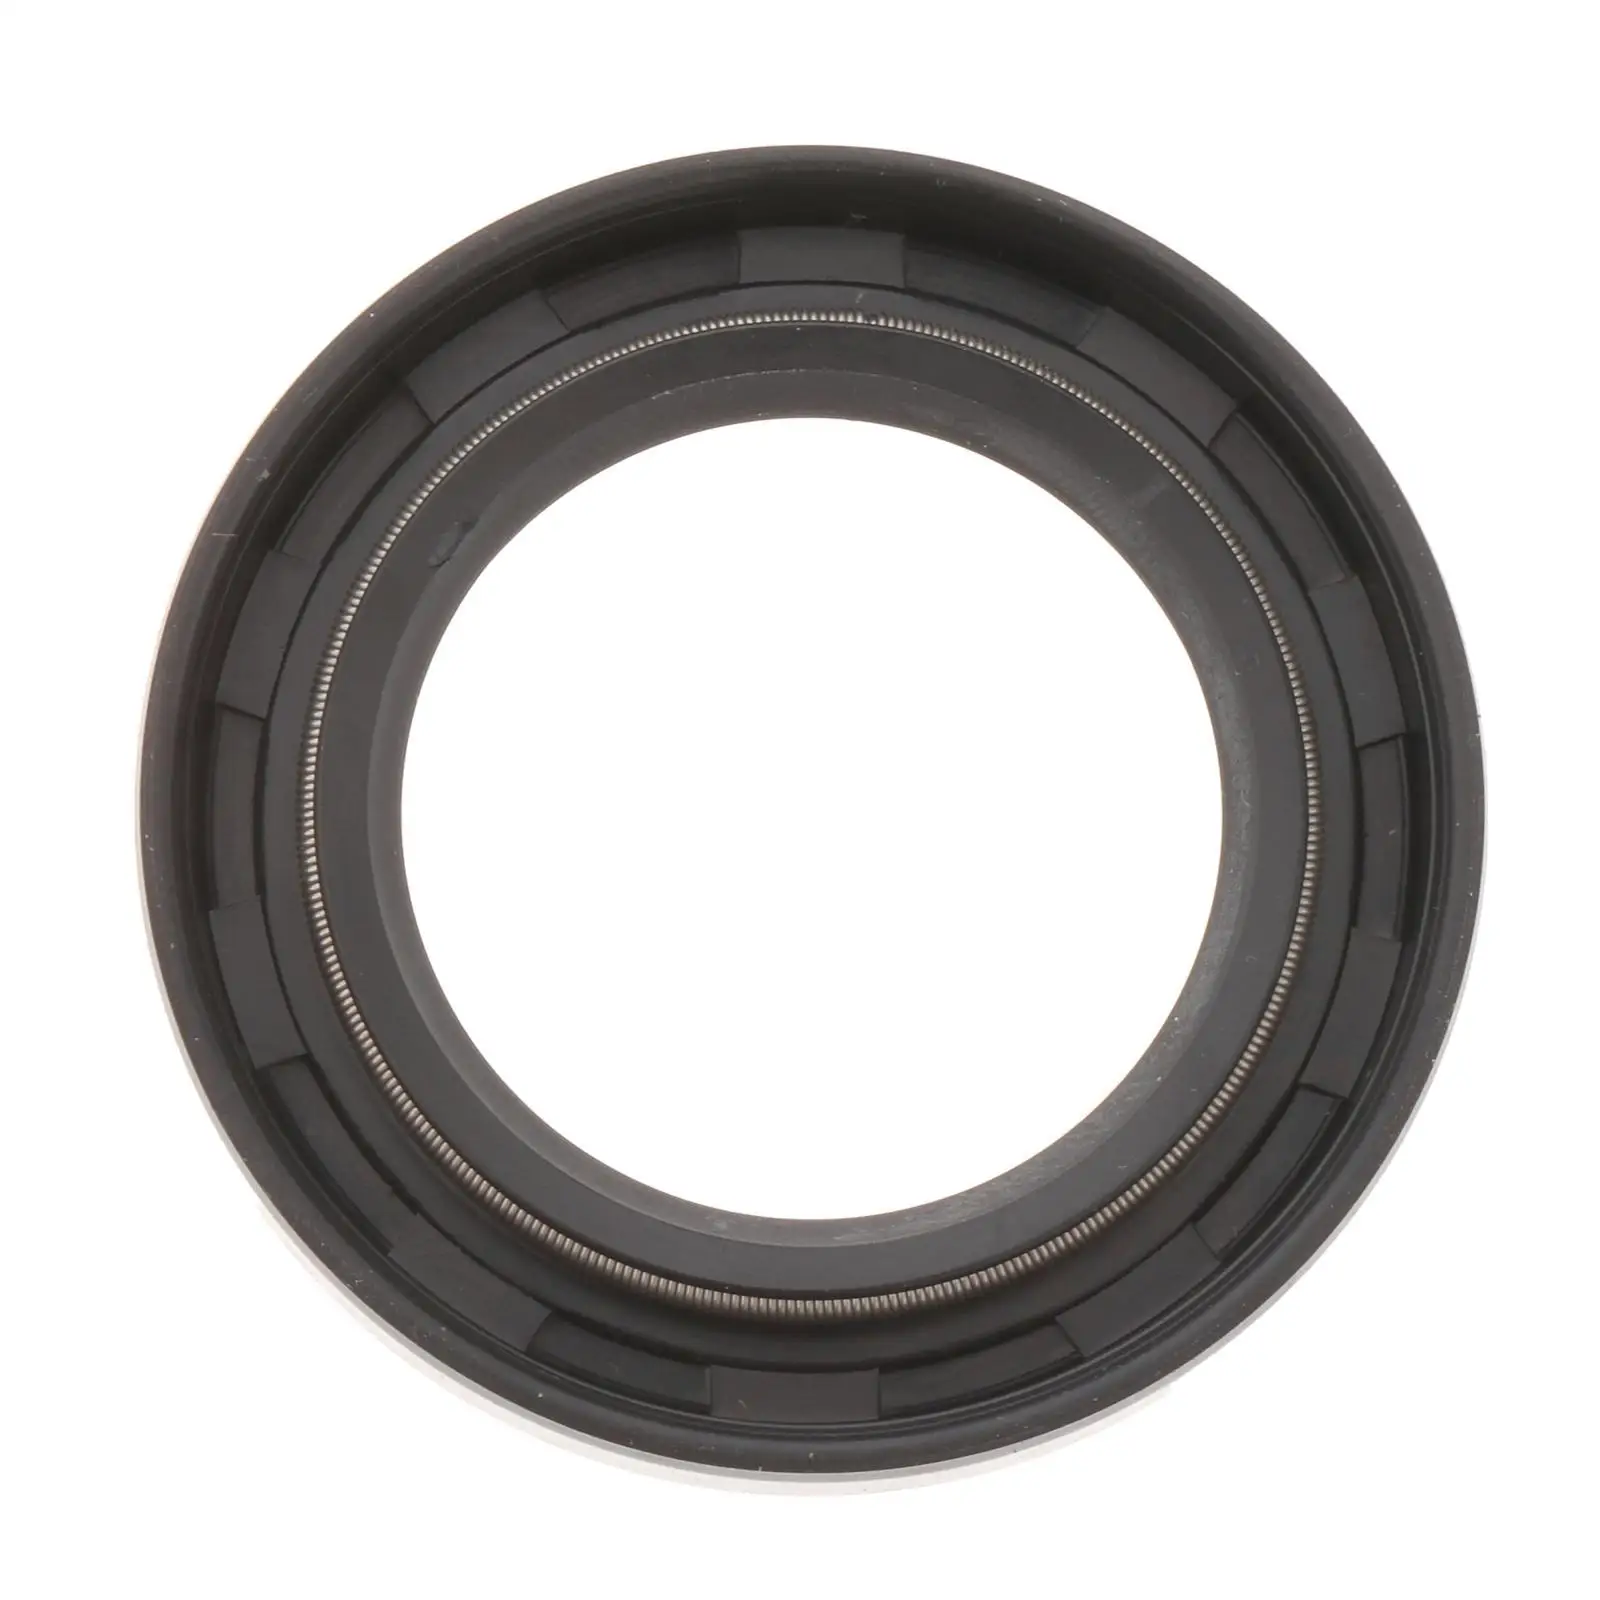 Oil Seal, 93102-30M23, Fits for Yamaha Outboard Motor Durable Replaces High Performance